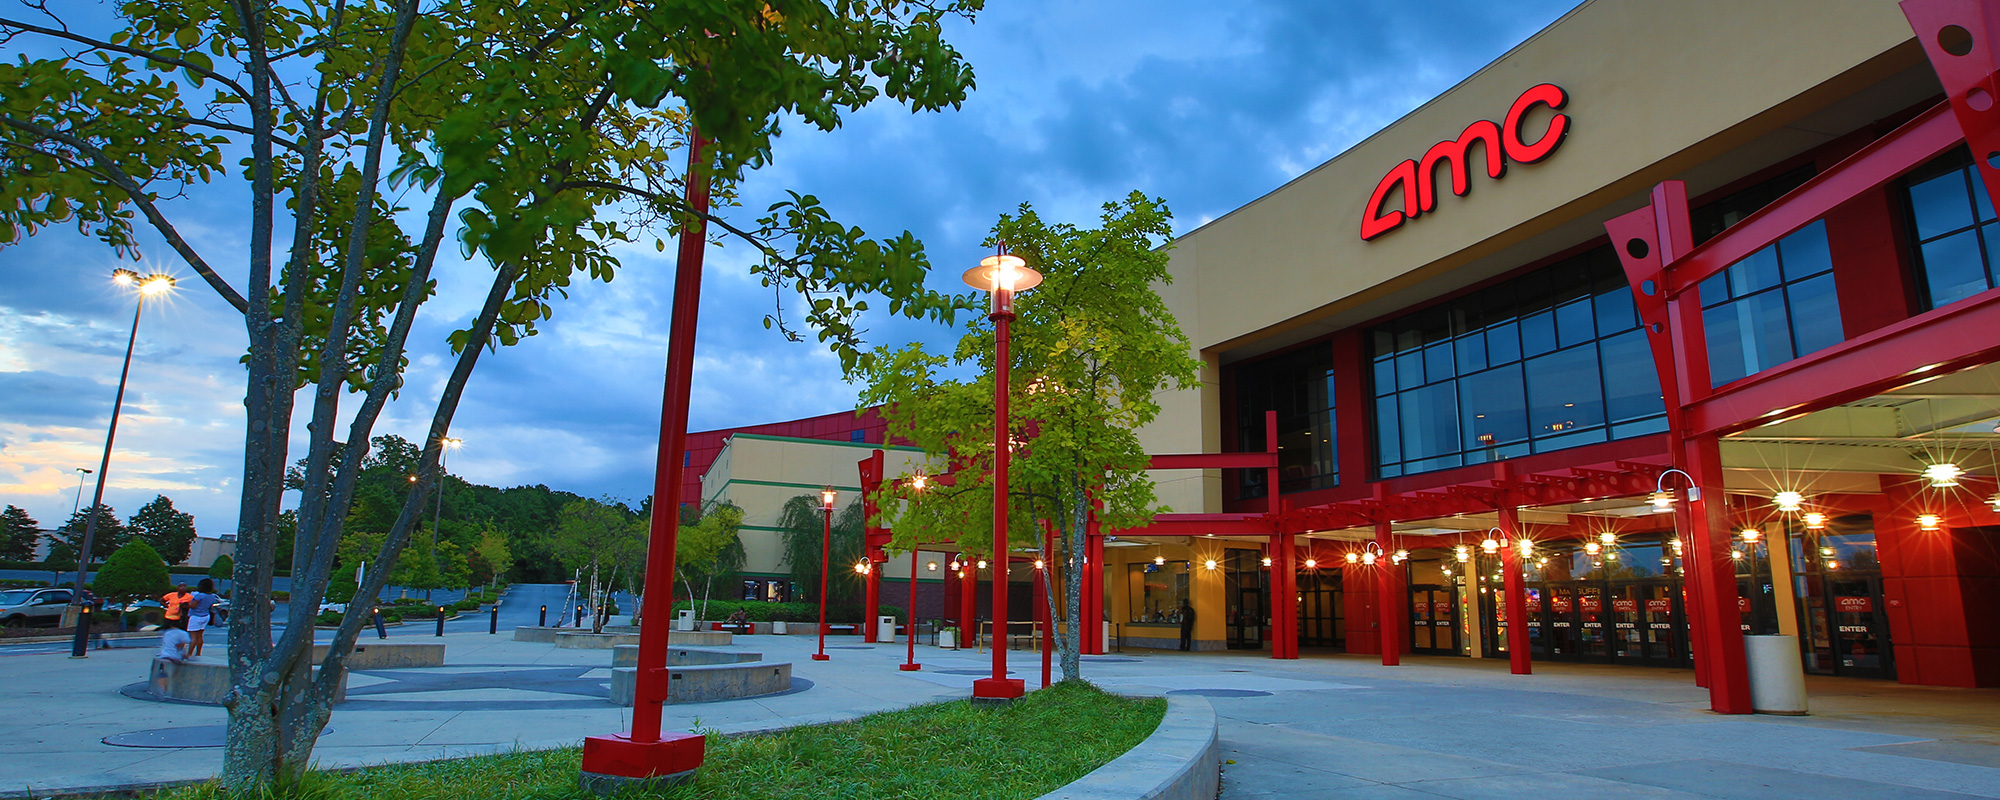 AMC Holland 8 renovations nearing completion - News 